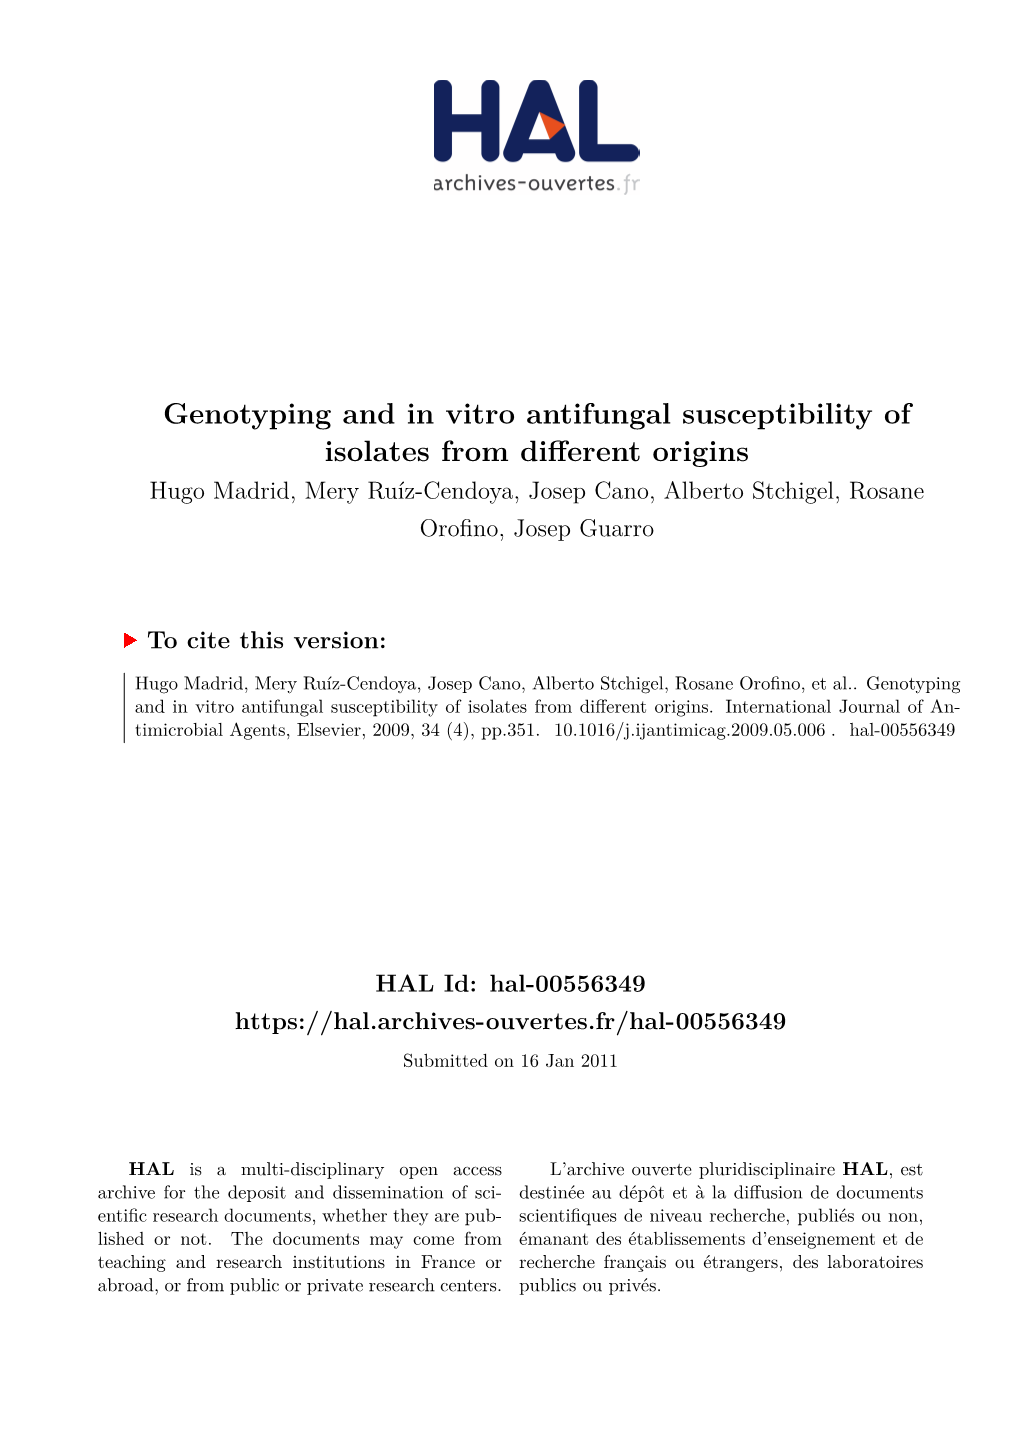 Genotyping and in Vitro Antifungal Susceptibility of Isolates From